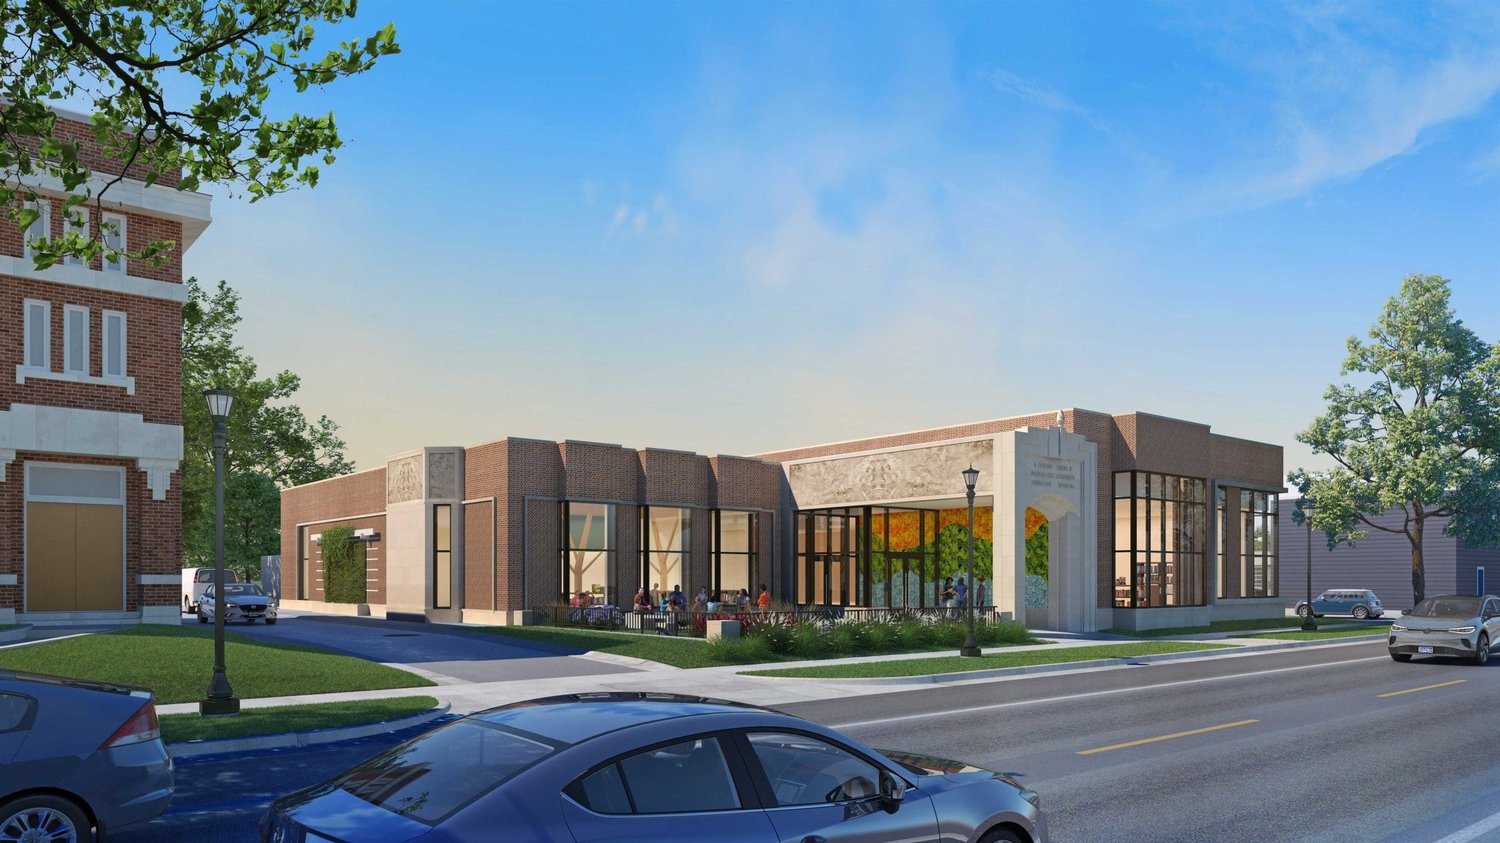 The city plans to demolish the Hamline Midway Library and build a new structure, as shown by this illustration.